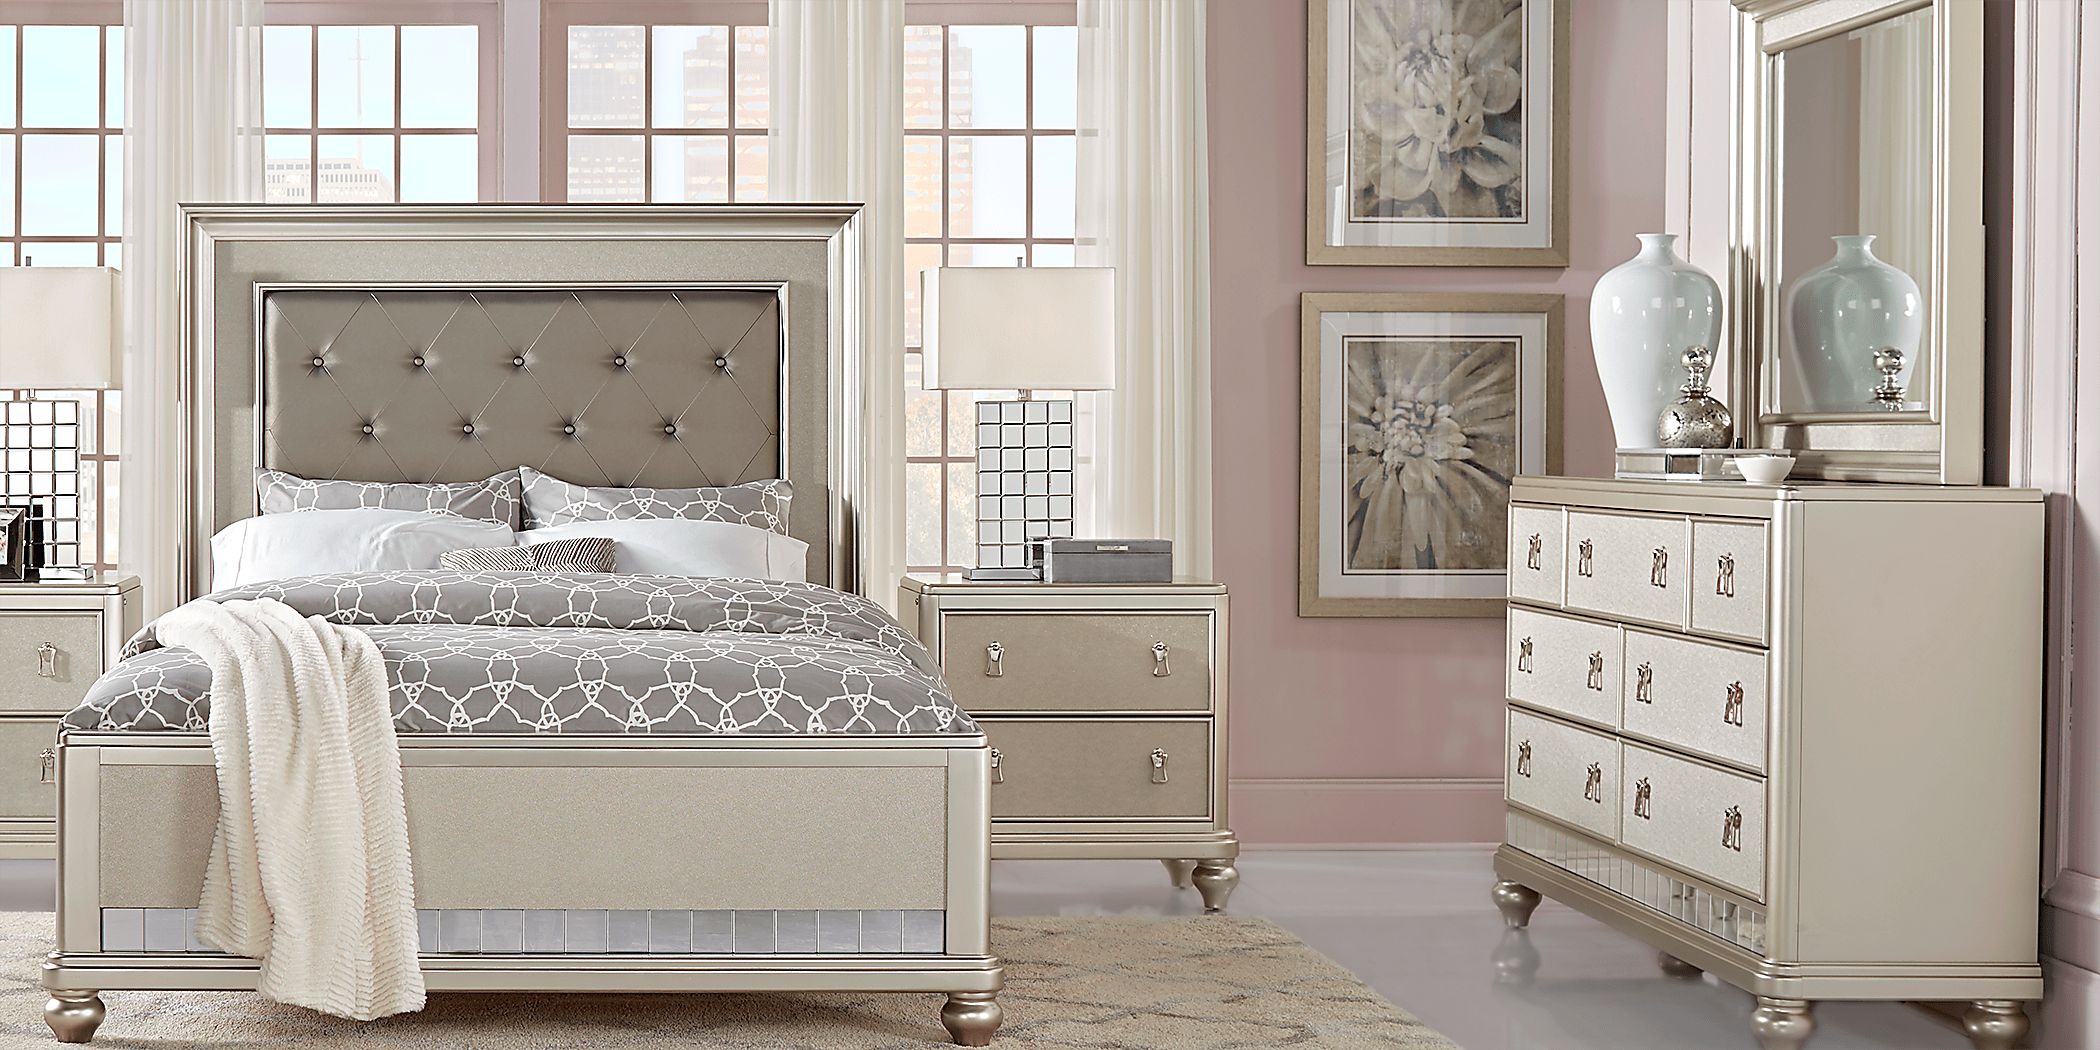 Rossie 4-Drawer Bedroom Chest